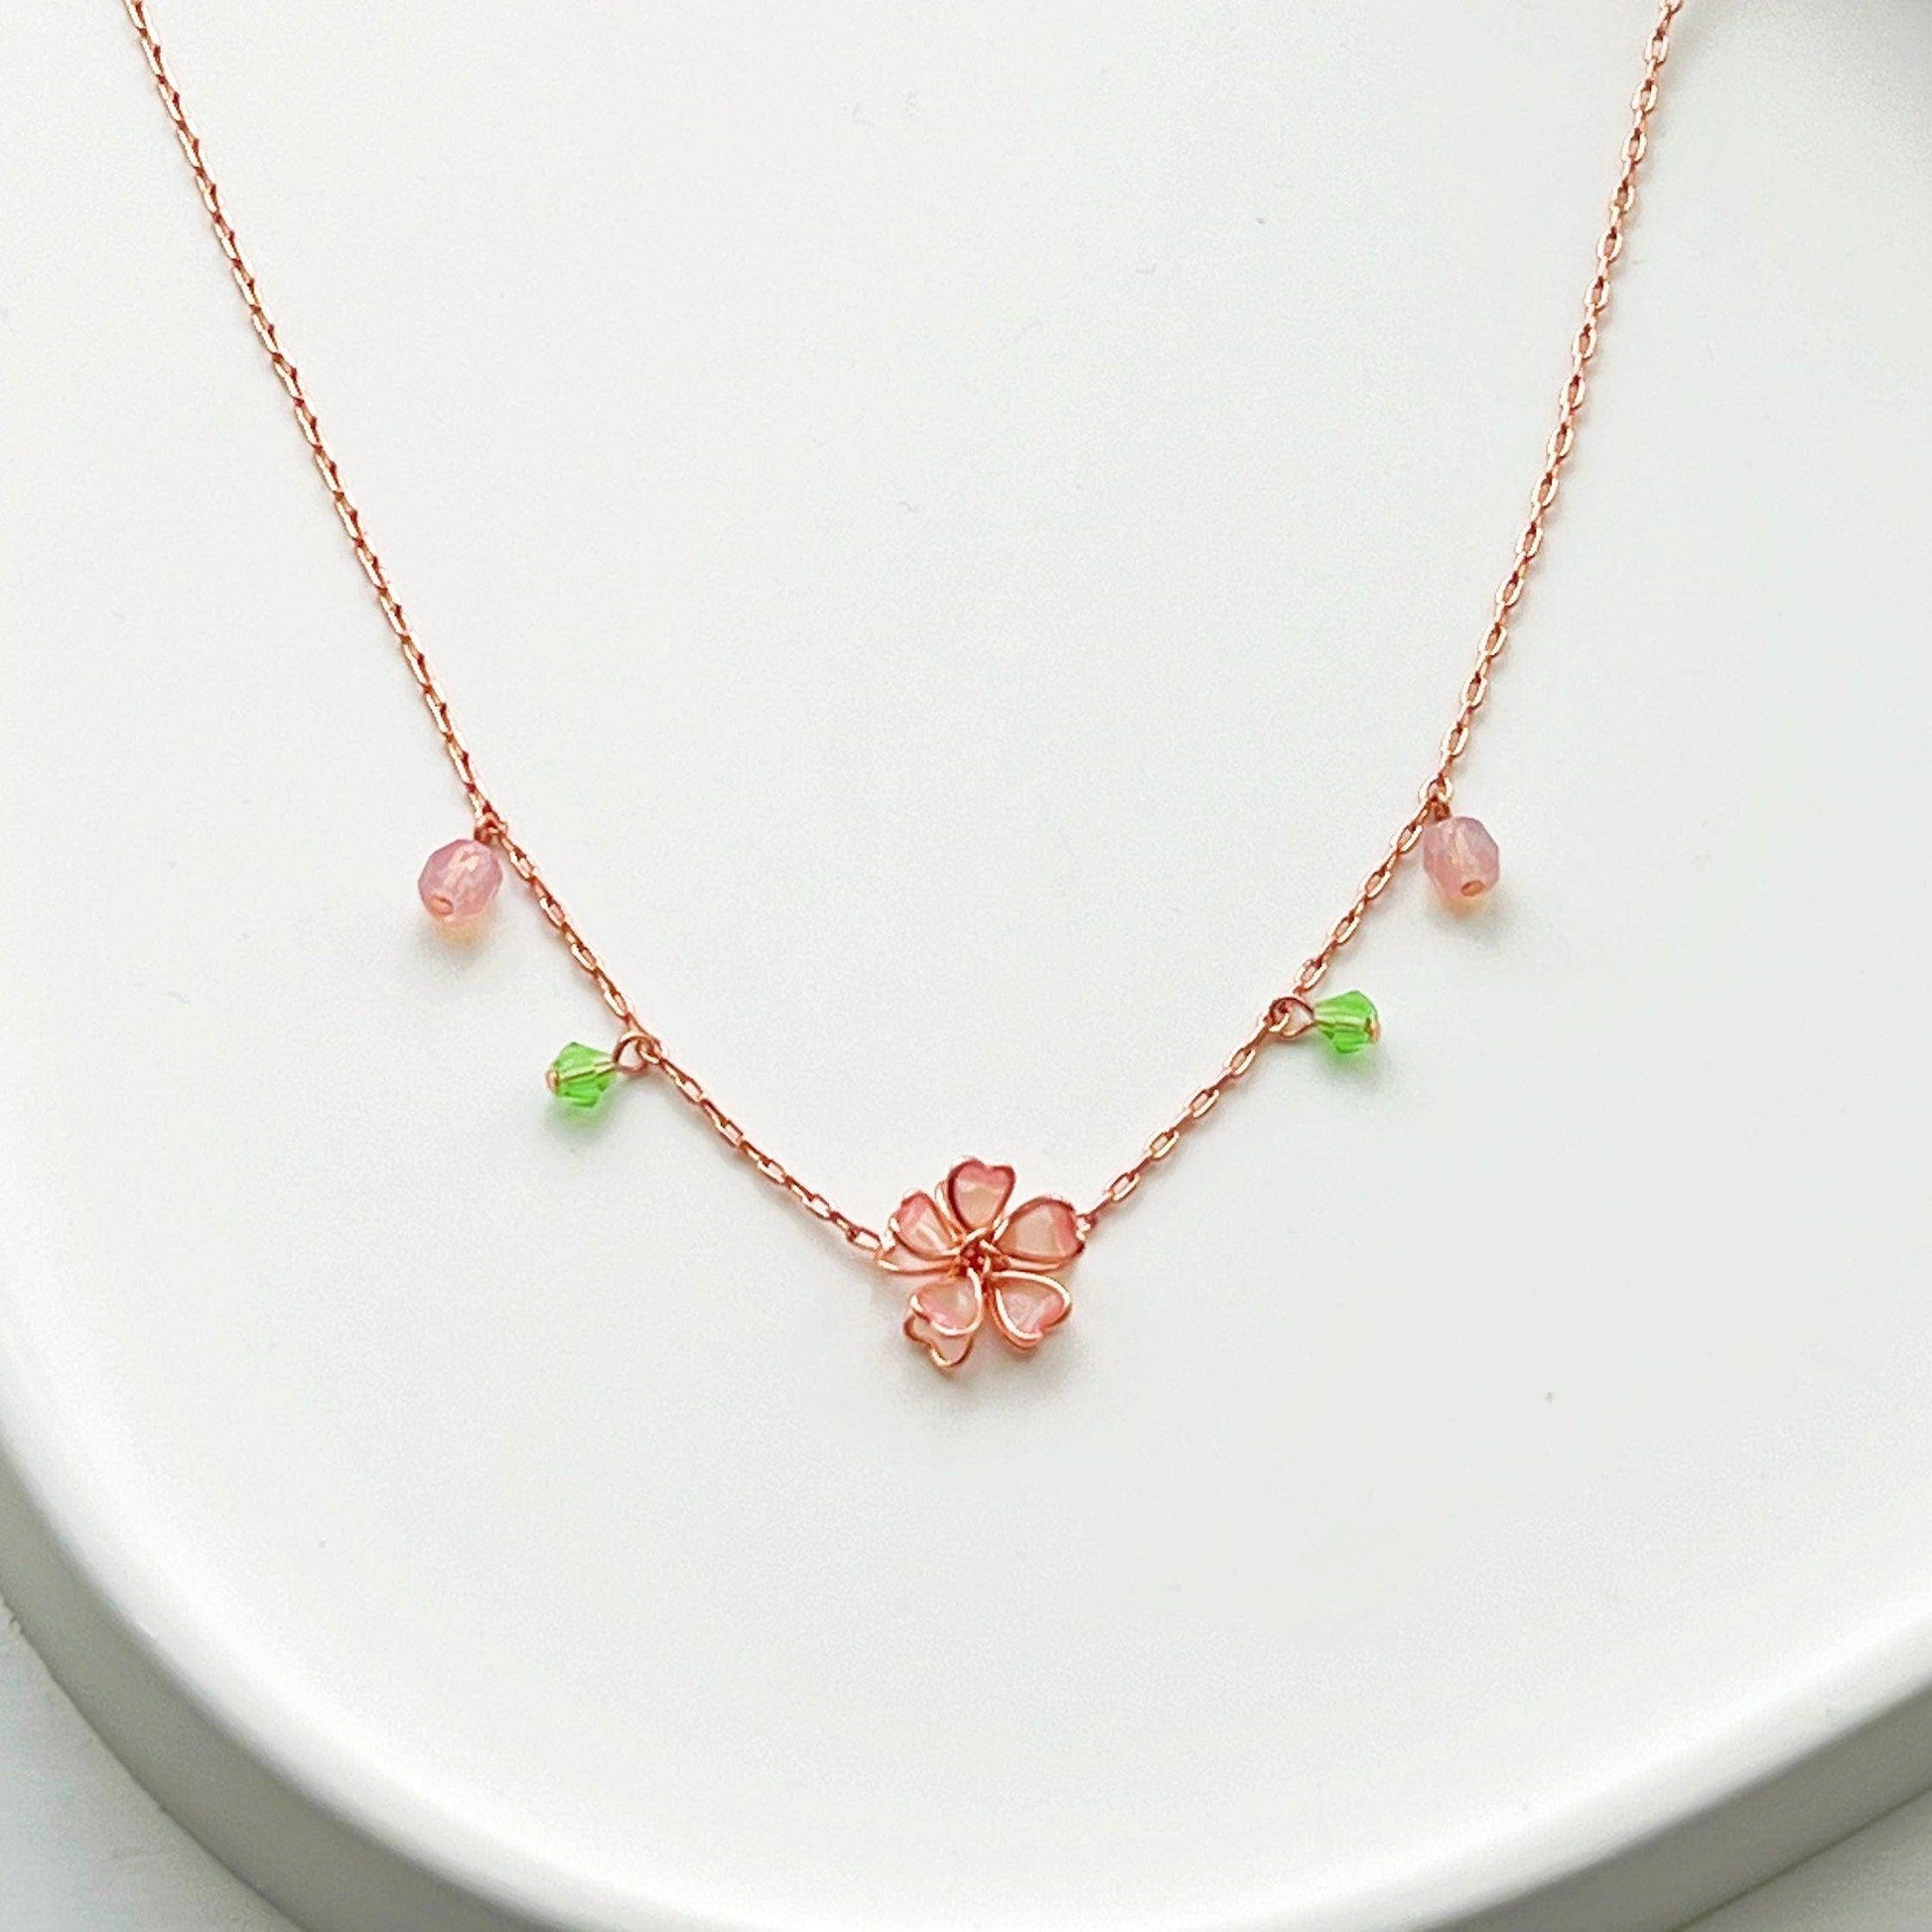 Sakura Flower Necklace - Pink Cherry Blossom with Green Crystal Necklace-Ninaouity